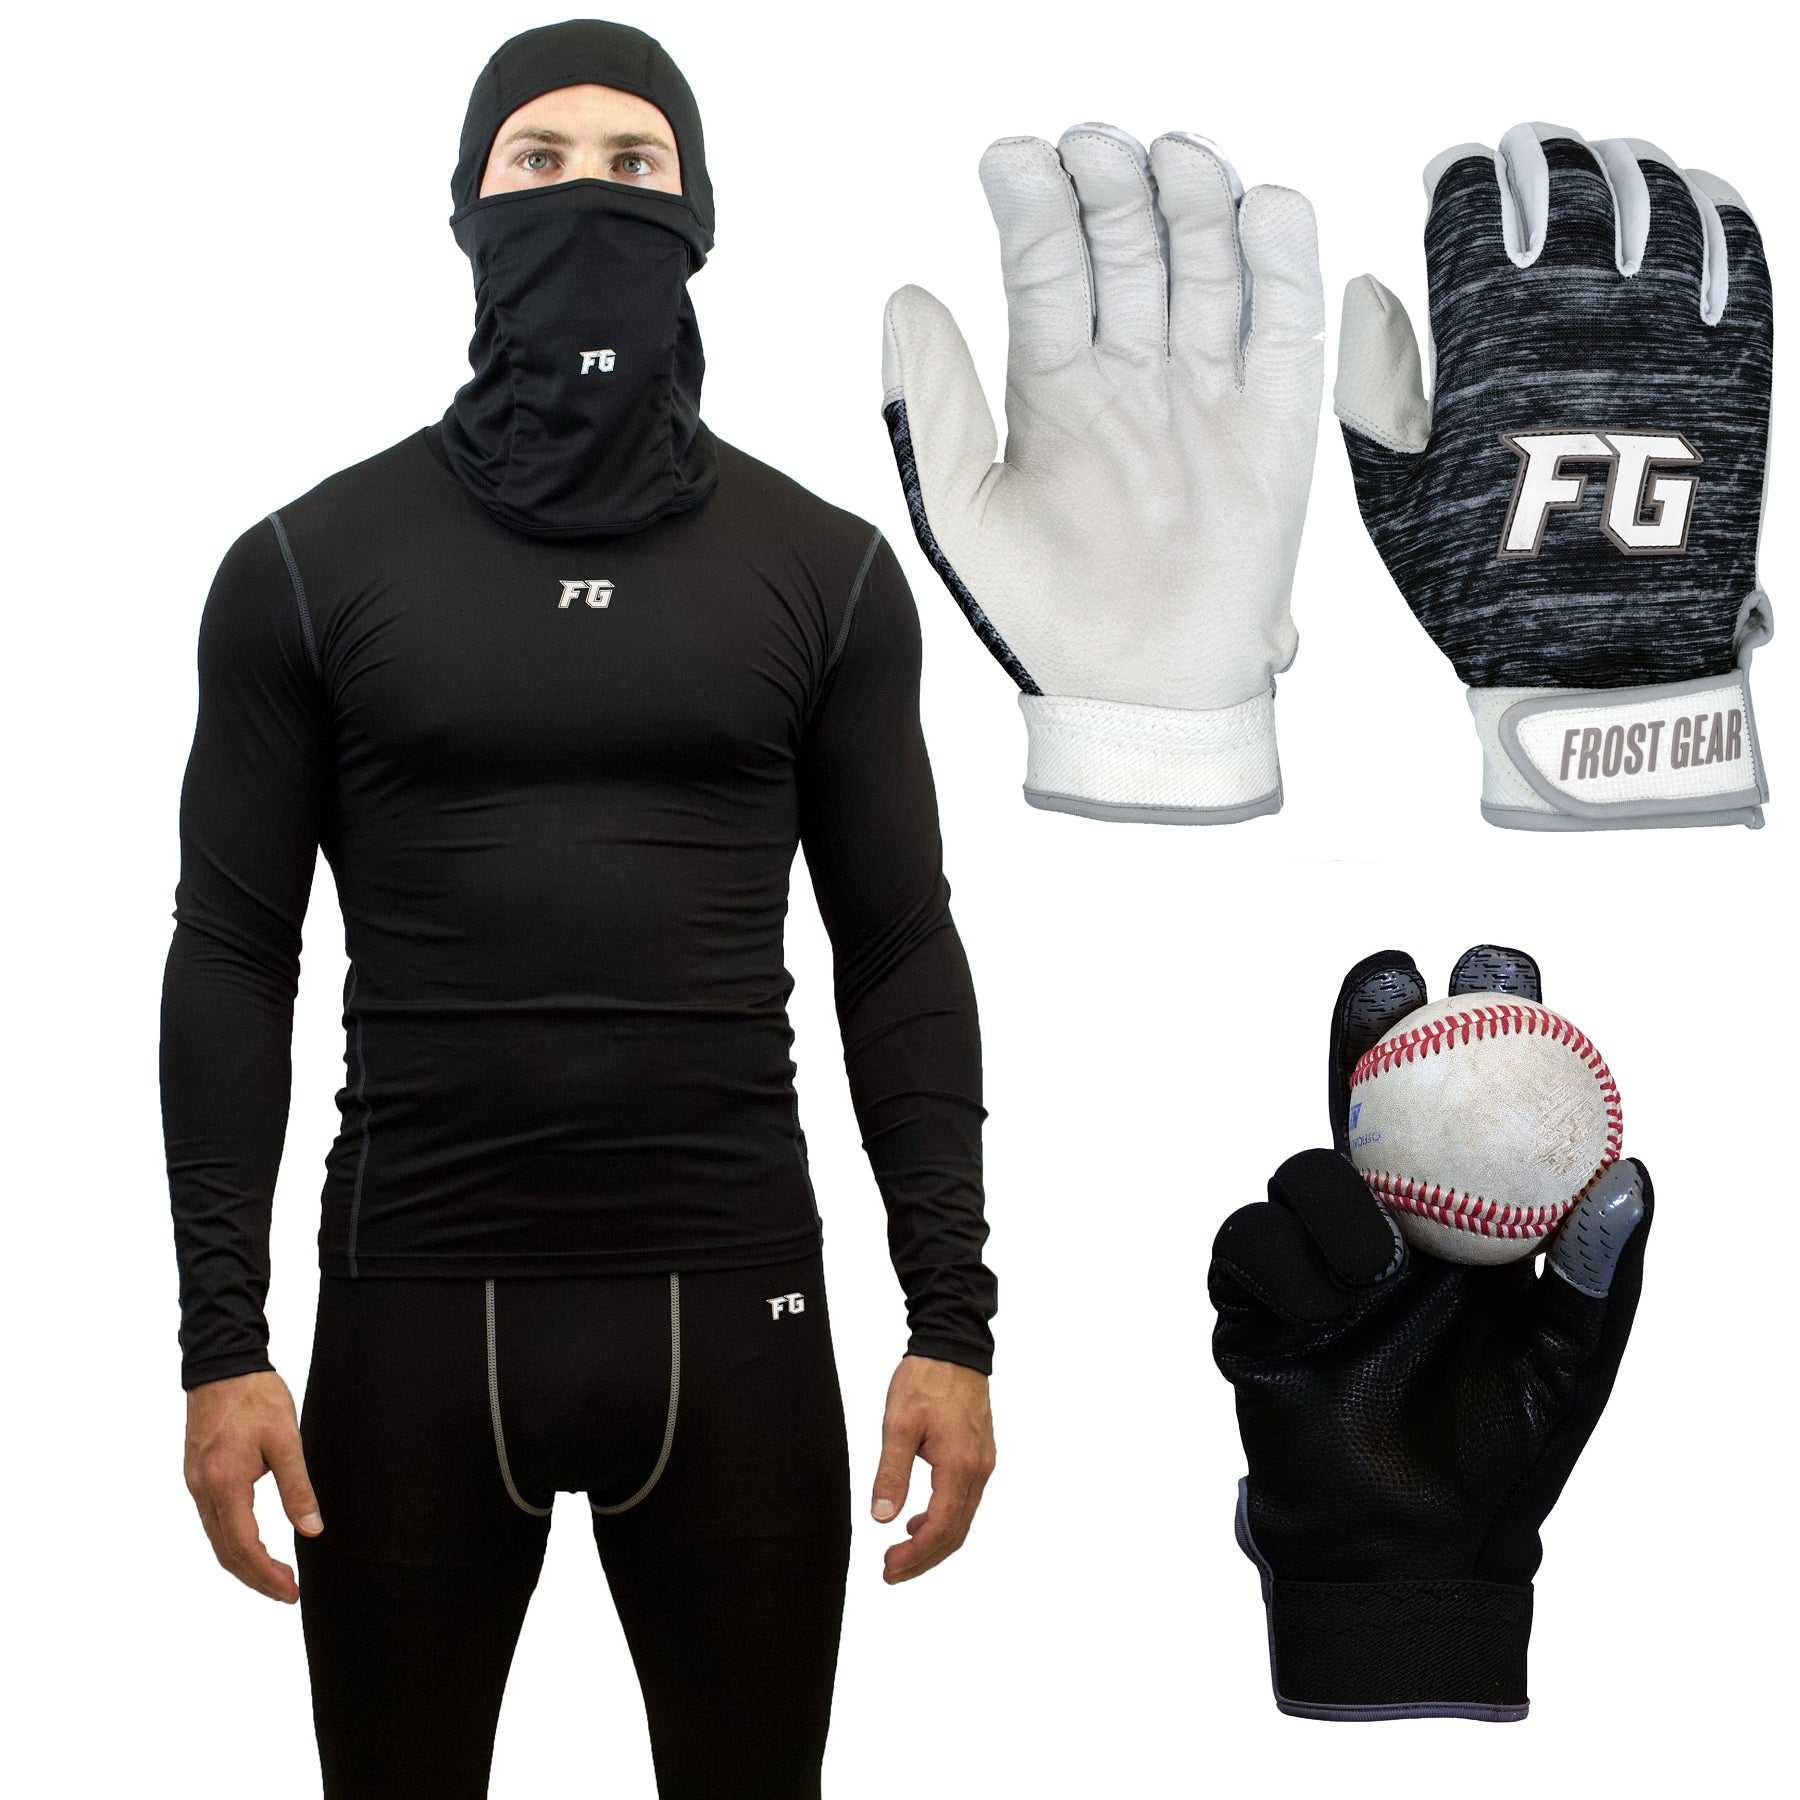 FG Cold Weather Performance Pack with White Batting Gloves - Adult Male